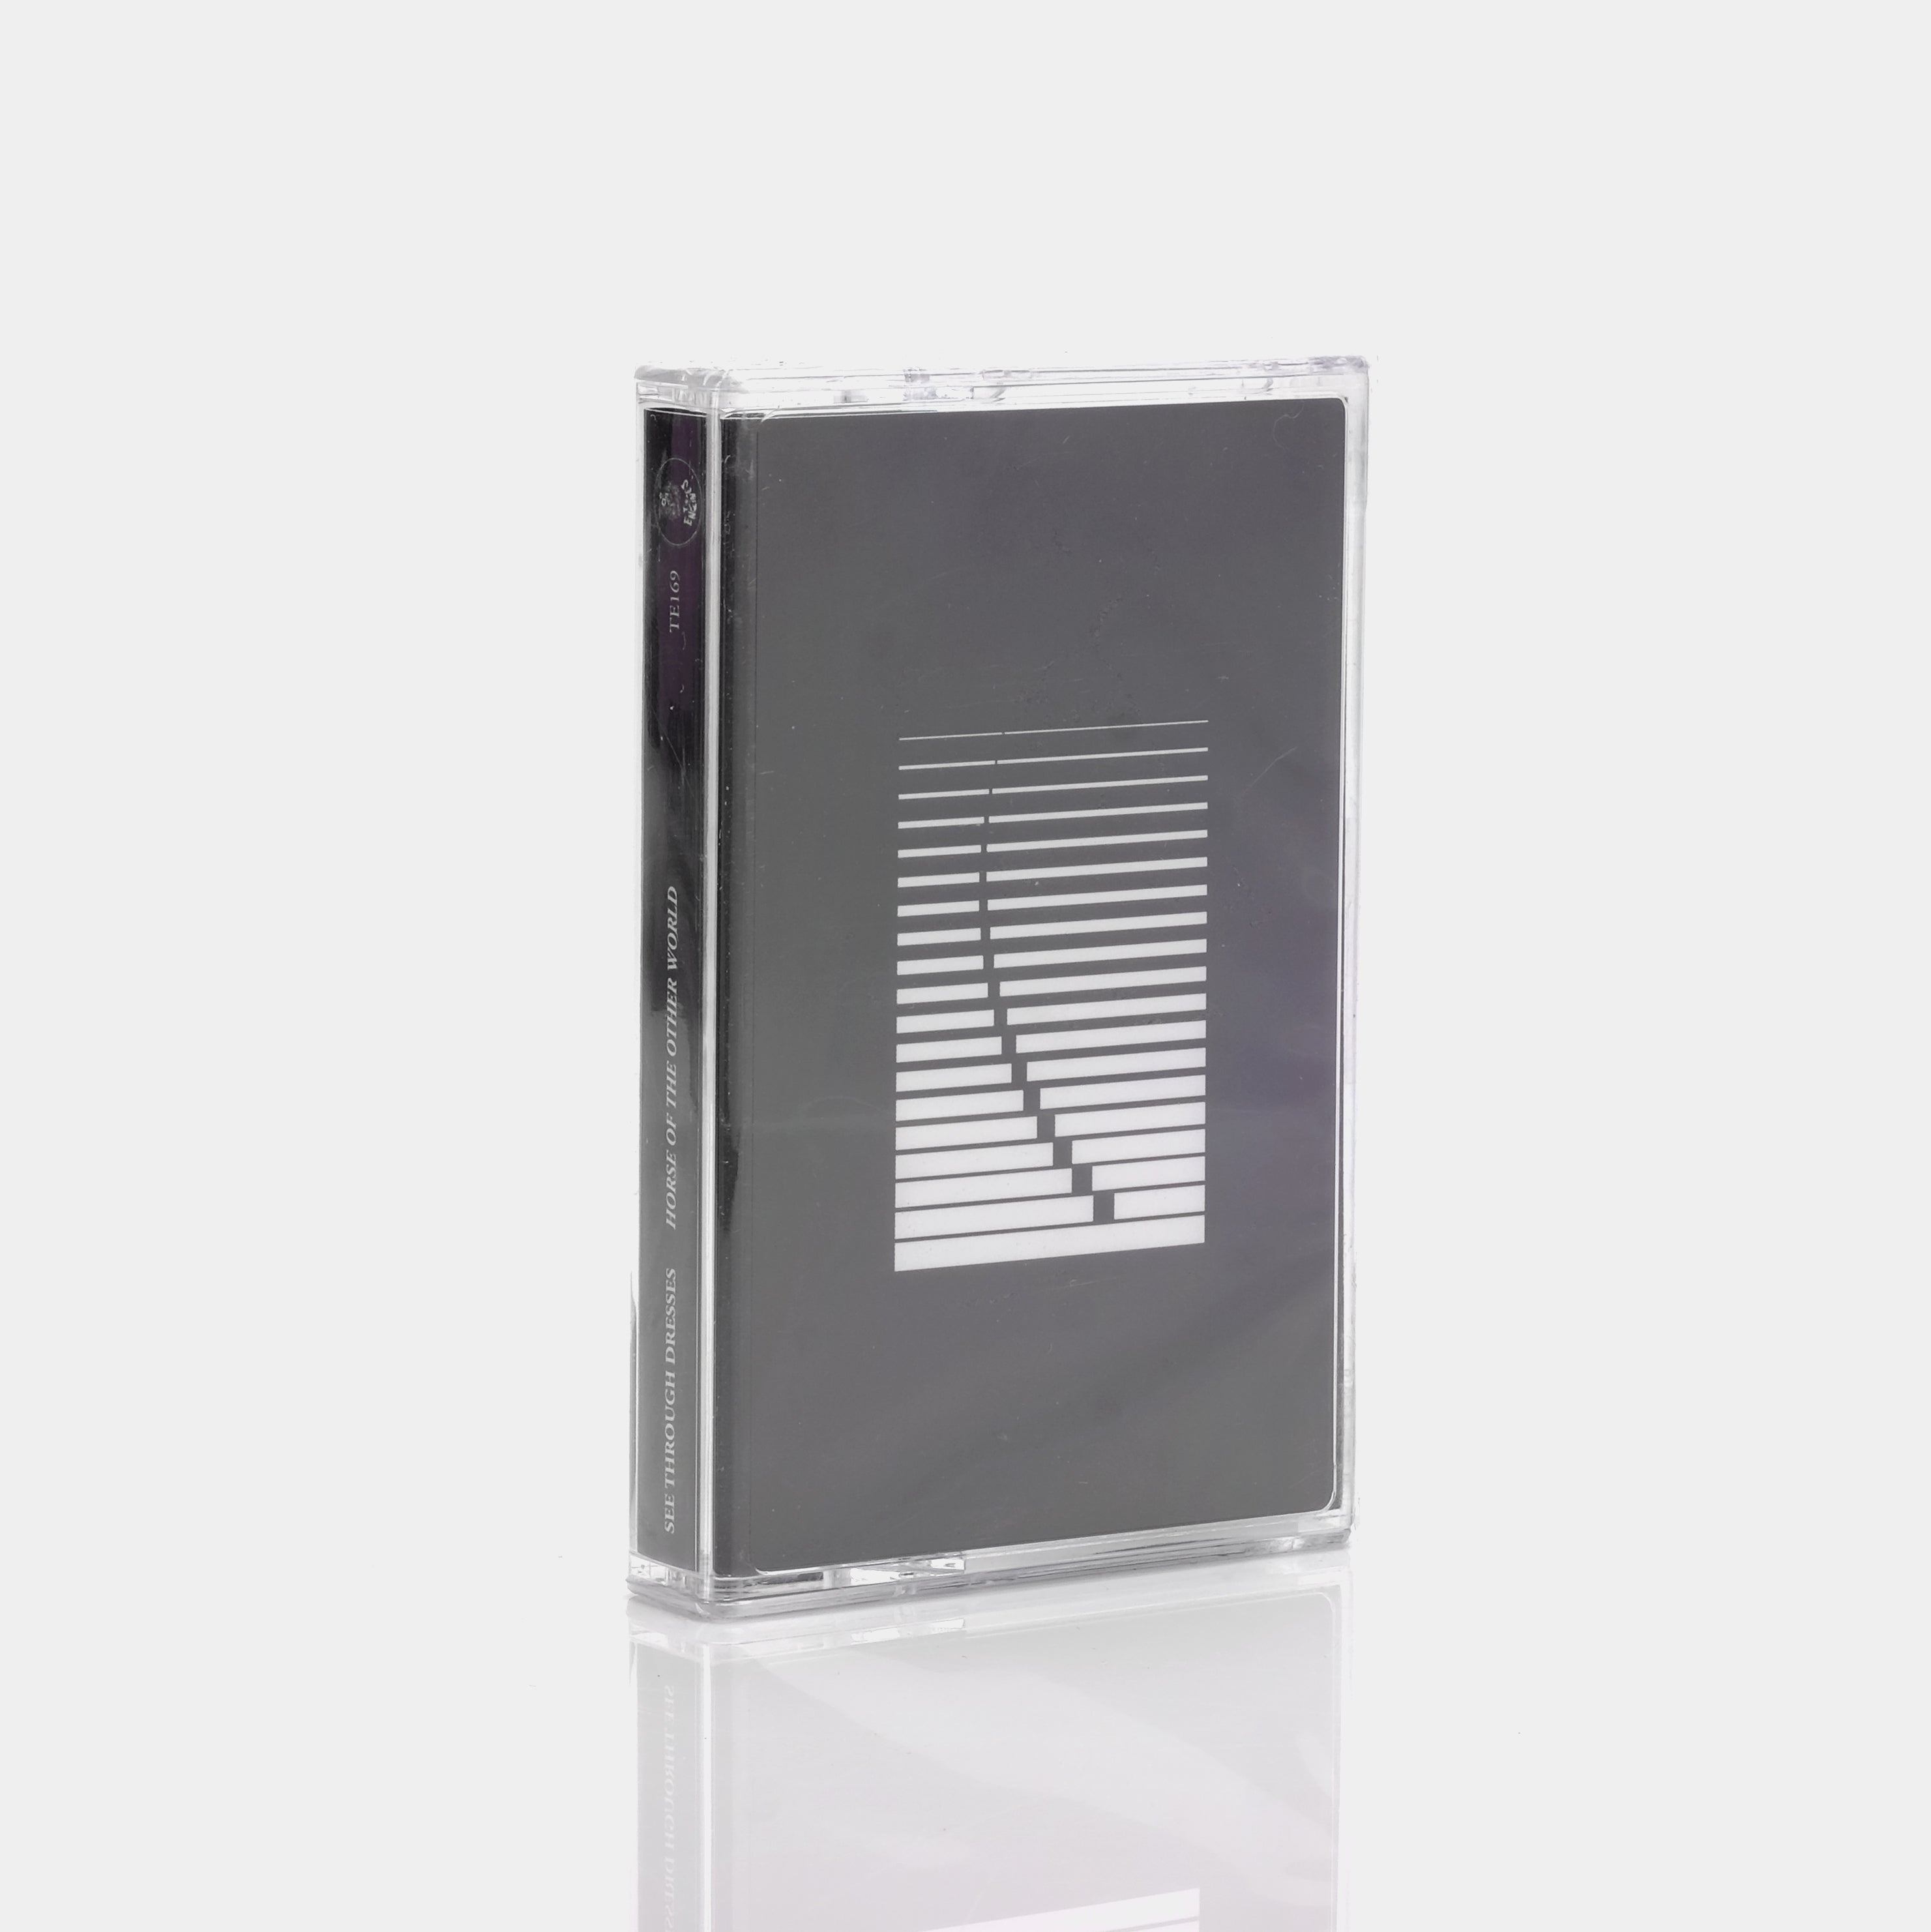 See Through Dresses - Horse of the Other World Cassette Tape